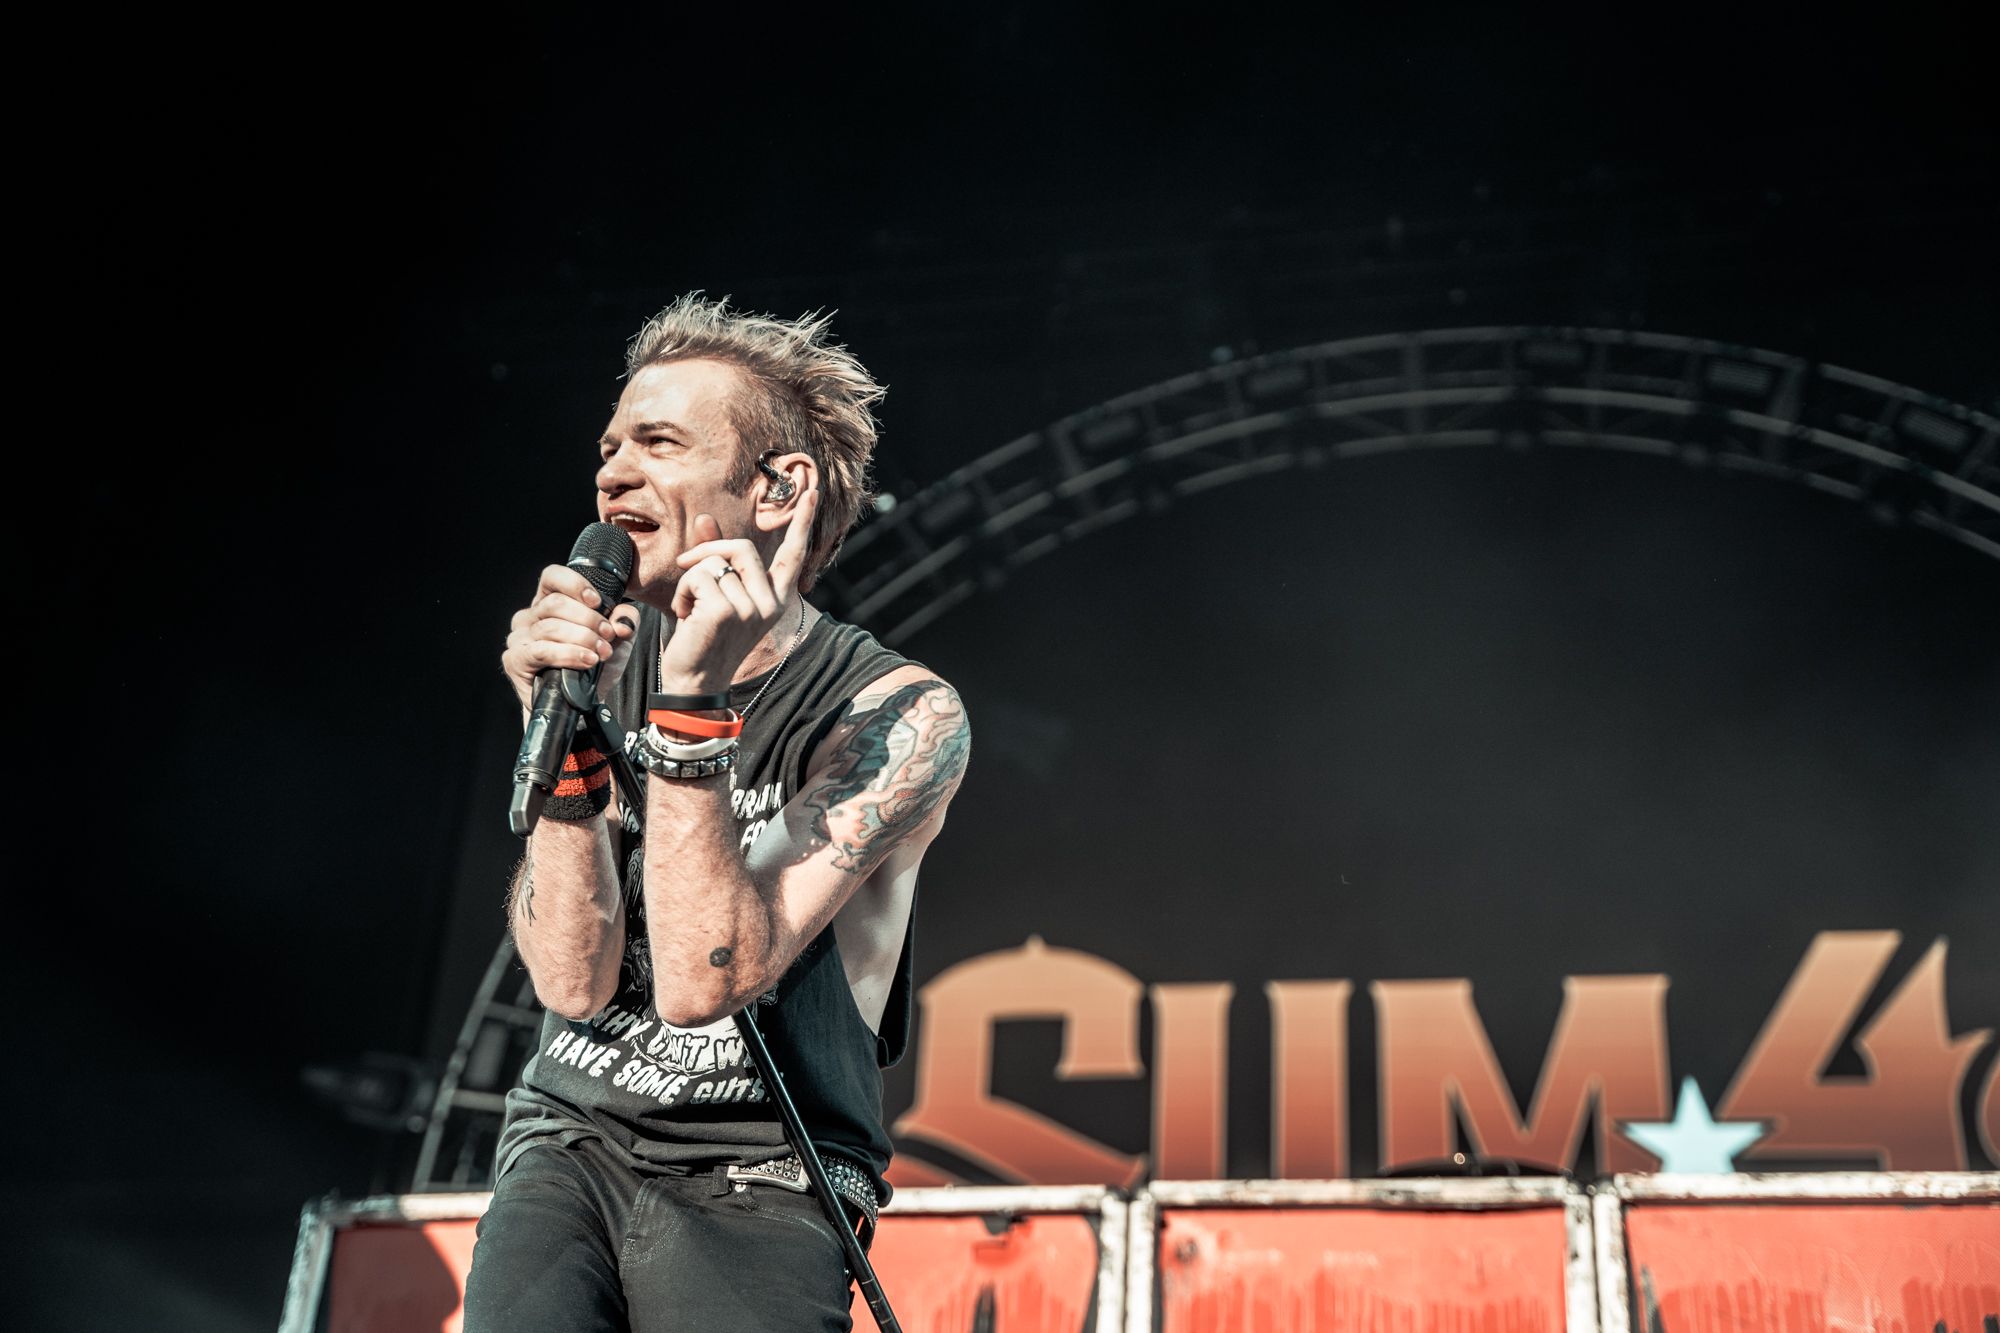 Sum 41 and Simple Plan announce joint North American tour 